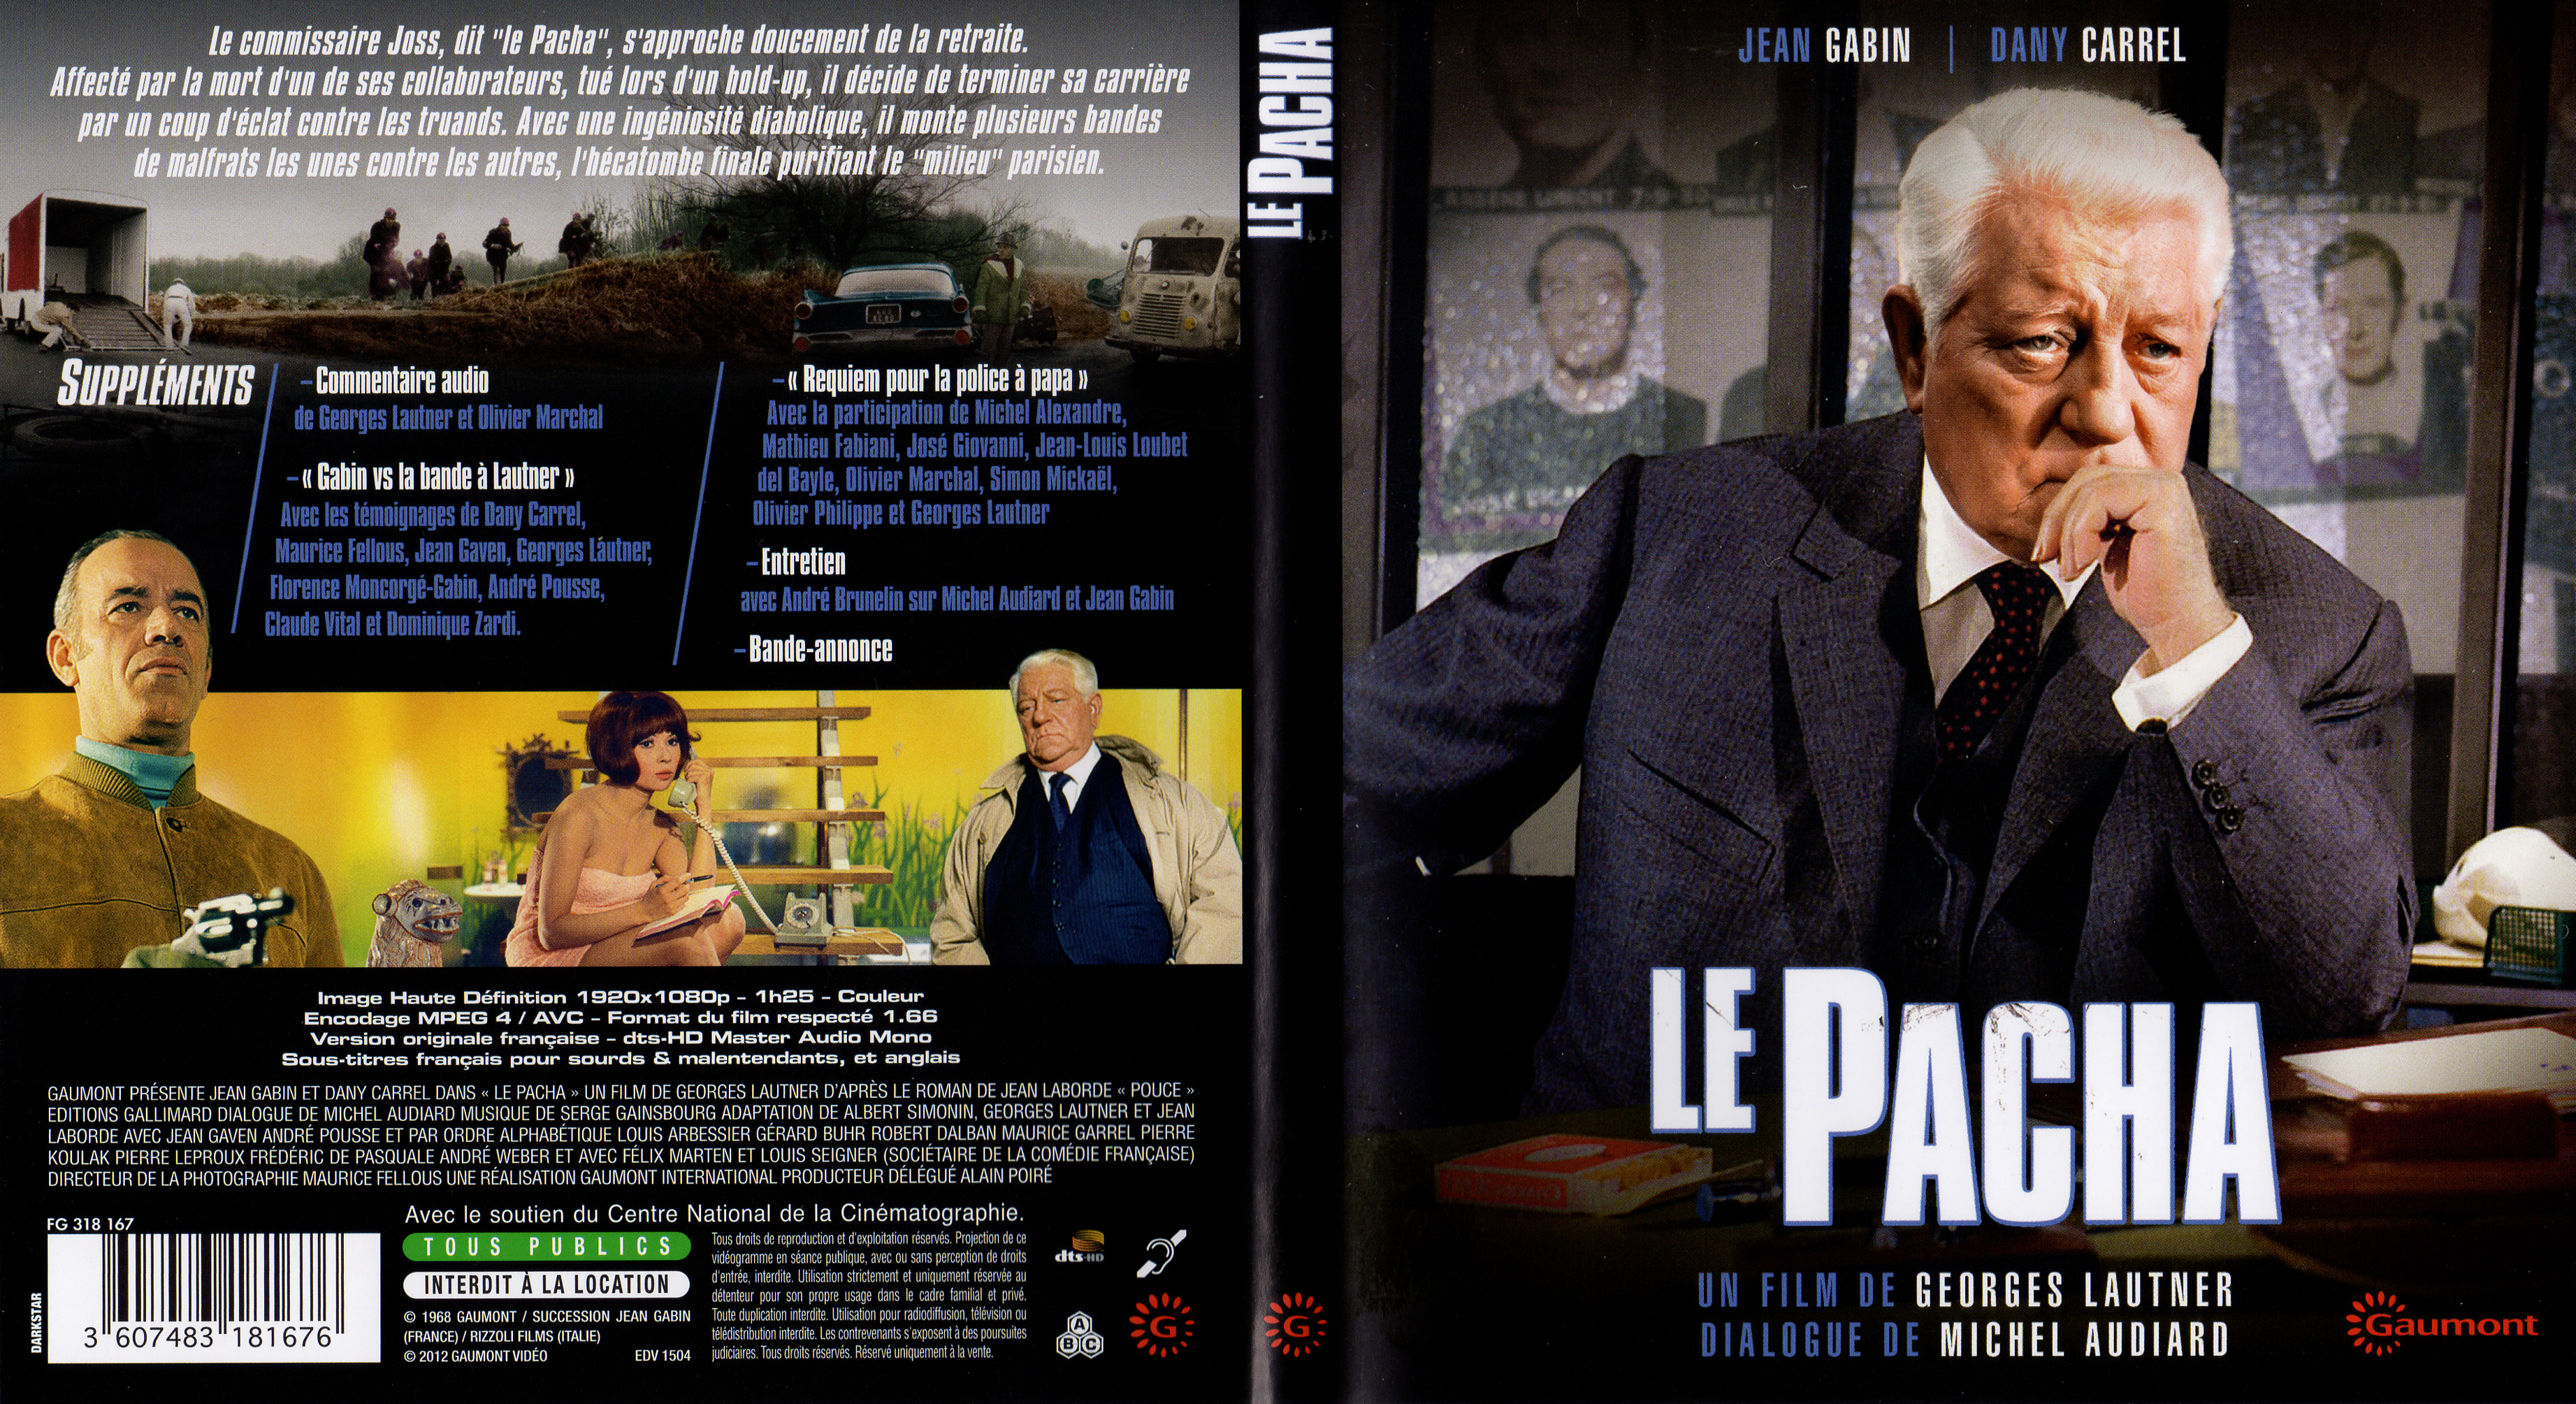 Jaquette DVD Le pacha (BLU-RAY)